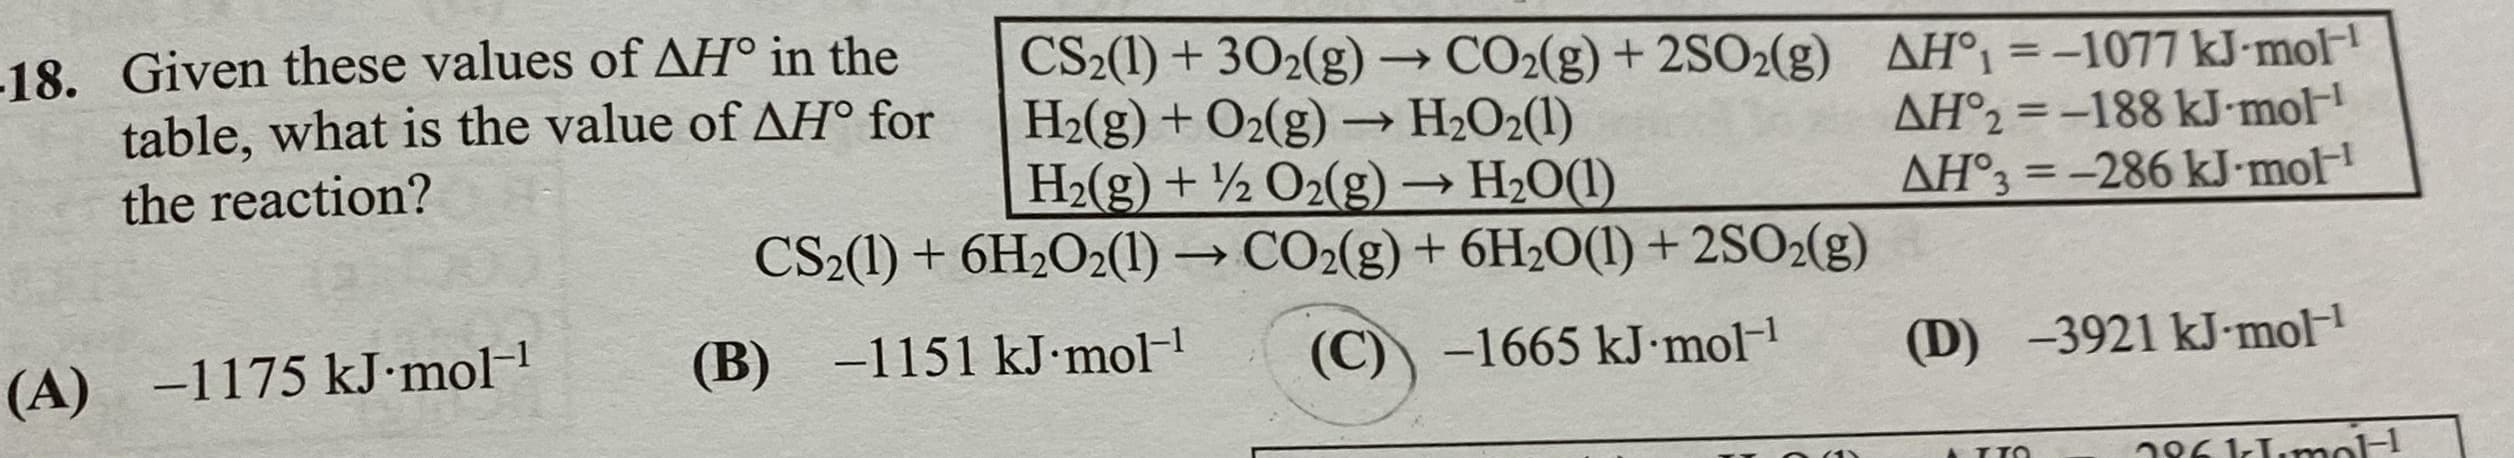 18. Given these values of AH° in the
table, what is the value of AH° for
CS2(1) + 302(g) → CO2(g) + 2SO2(g)
H2(g) + O2(g) → H2O2(1)
H2(g) + ½ O2(g) → H2O(1)
CS2(1) + 6H2O2(1) → CO2(g) + 6H2O(1) + 2SO2(g)
AH°1 =-1077 kJ-mol-
AH°2 = -188 kJ-mol
AH°3 = -286 kJ-mol
%3D
the reaction?
%3D
-1151 kJ mol-
(B)
(A) -1175 kJ•mol
(C)) -1665 kJ•mol-1
(D) -3921 kJ-mol-
